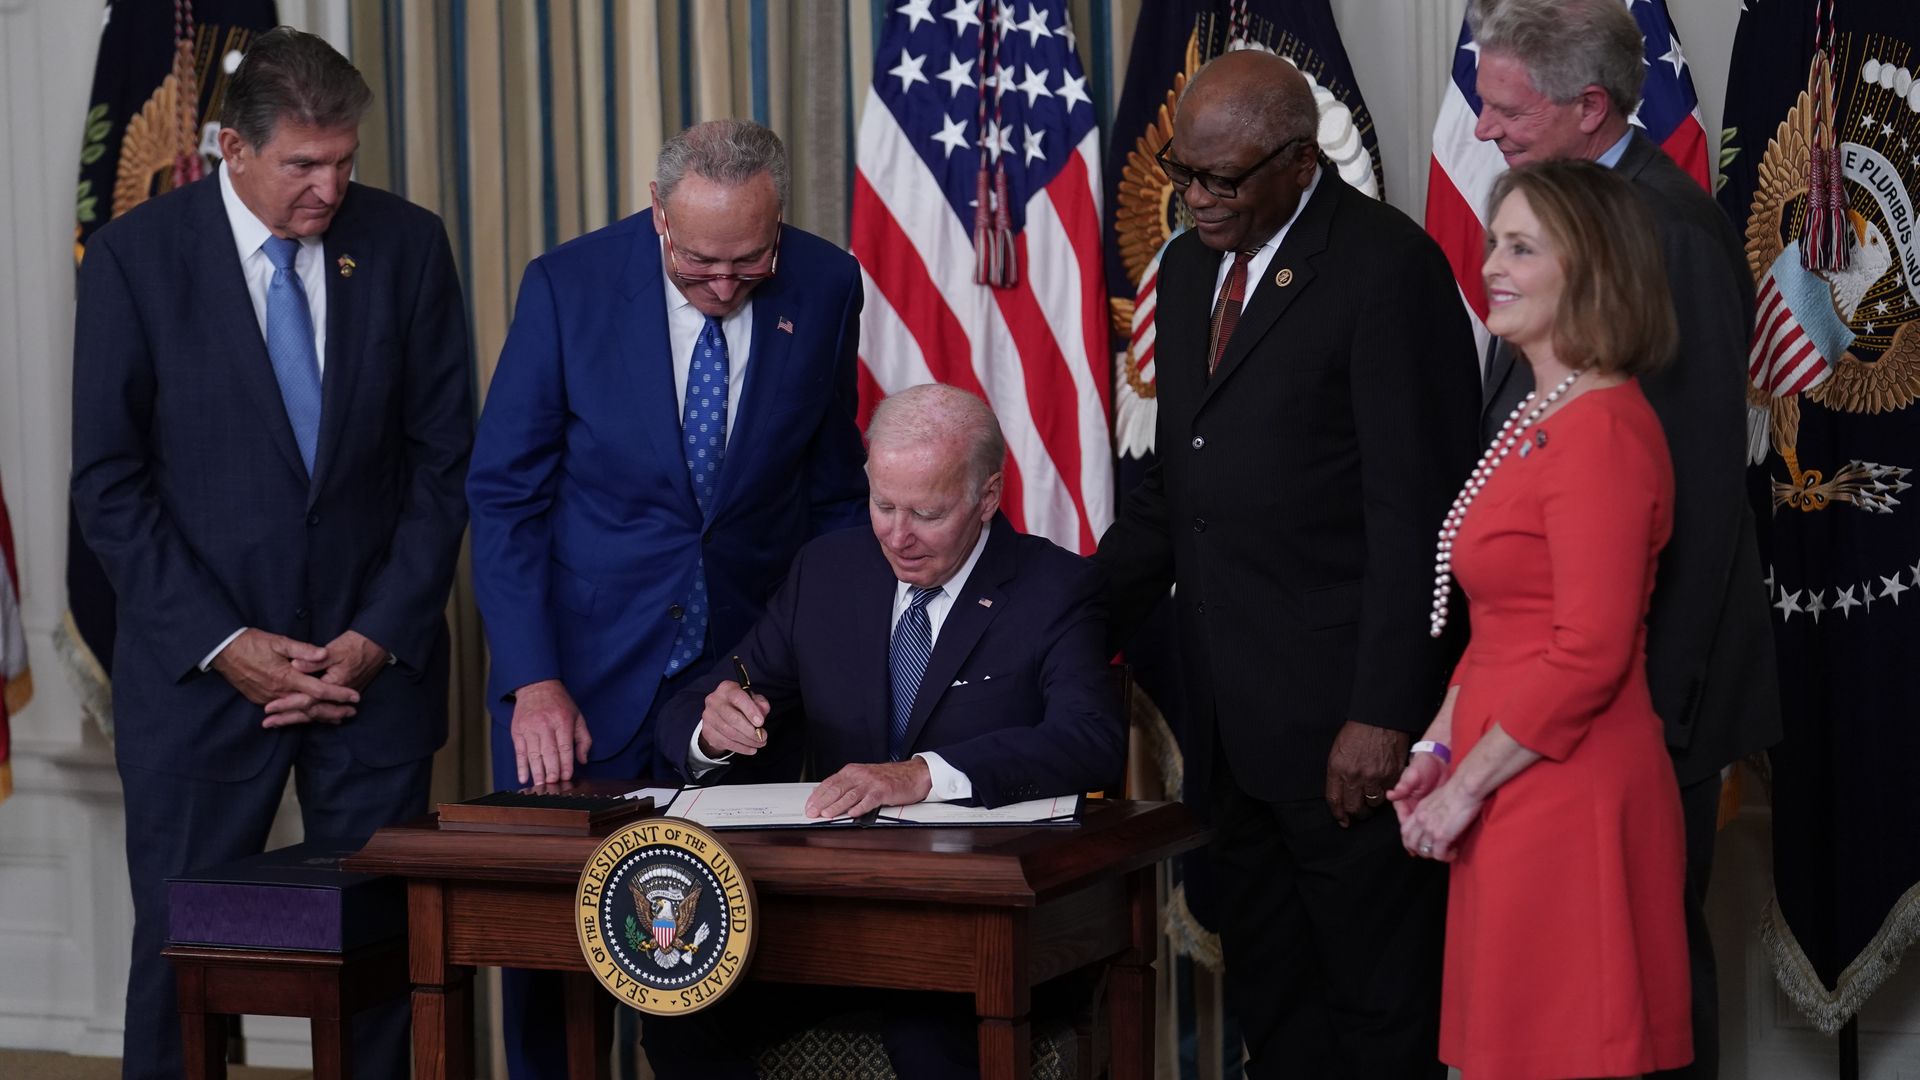 Photo of Joe Biden signing a bill on a desk with lawmakers crowded around and behind him